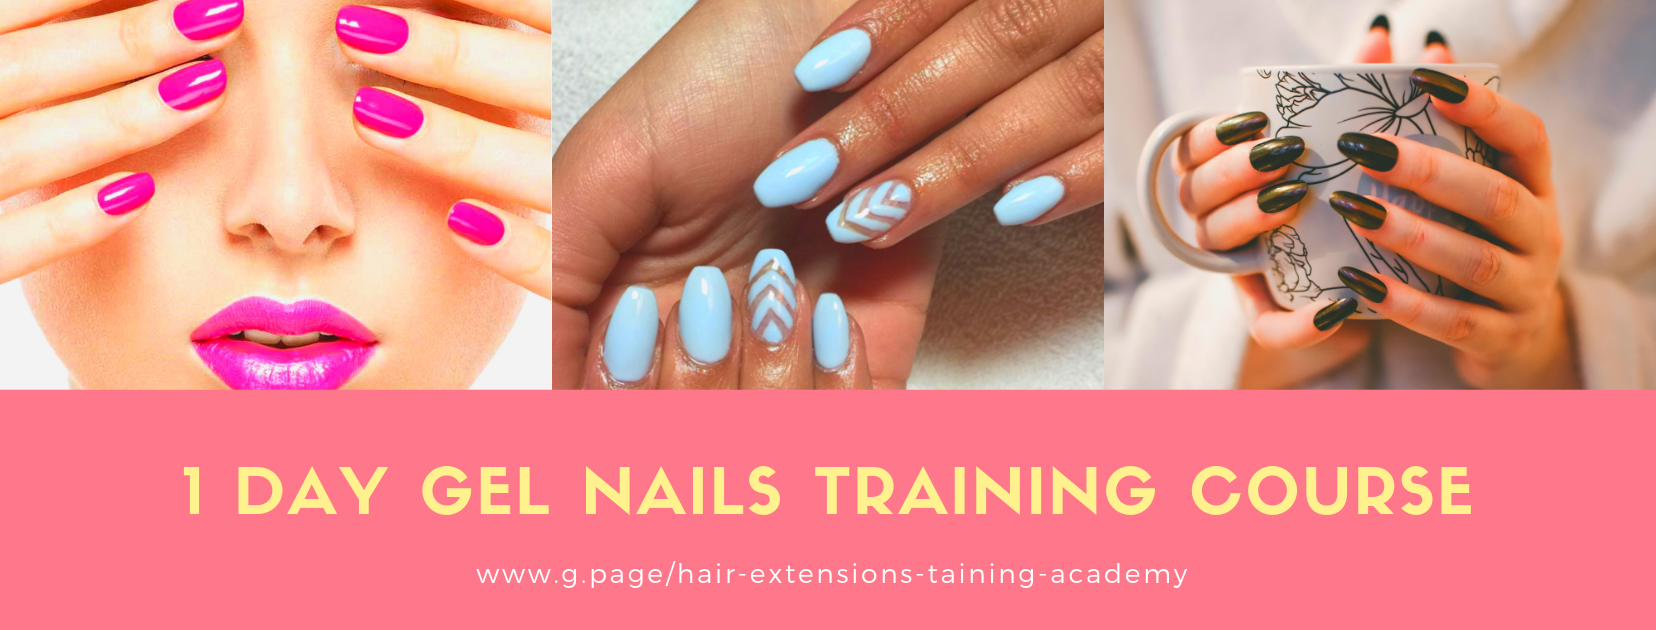 How to Start a Gel Nail Business after Qualifying | Diane Shawe Blog